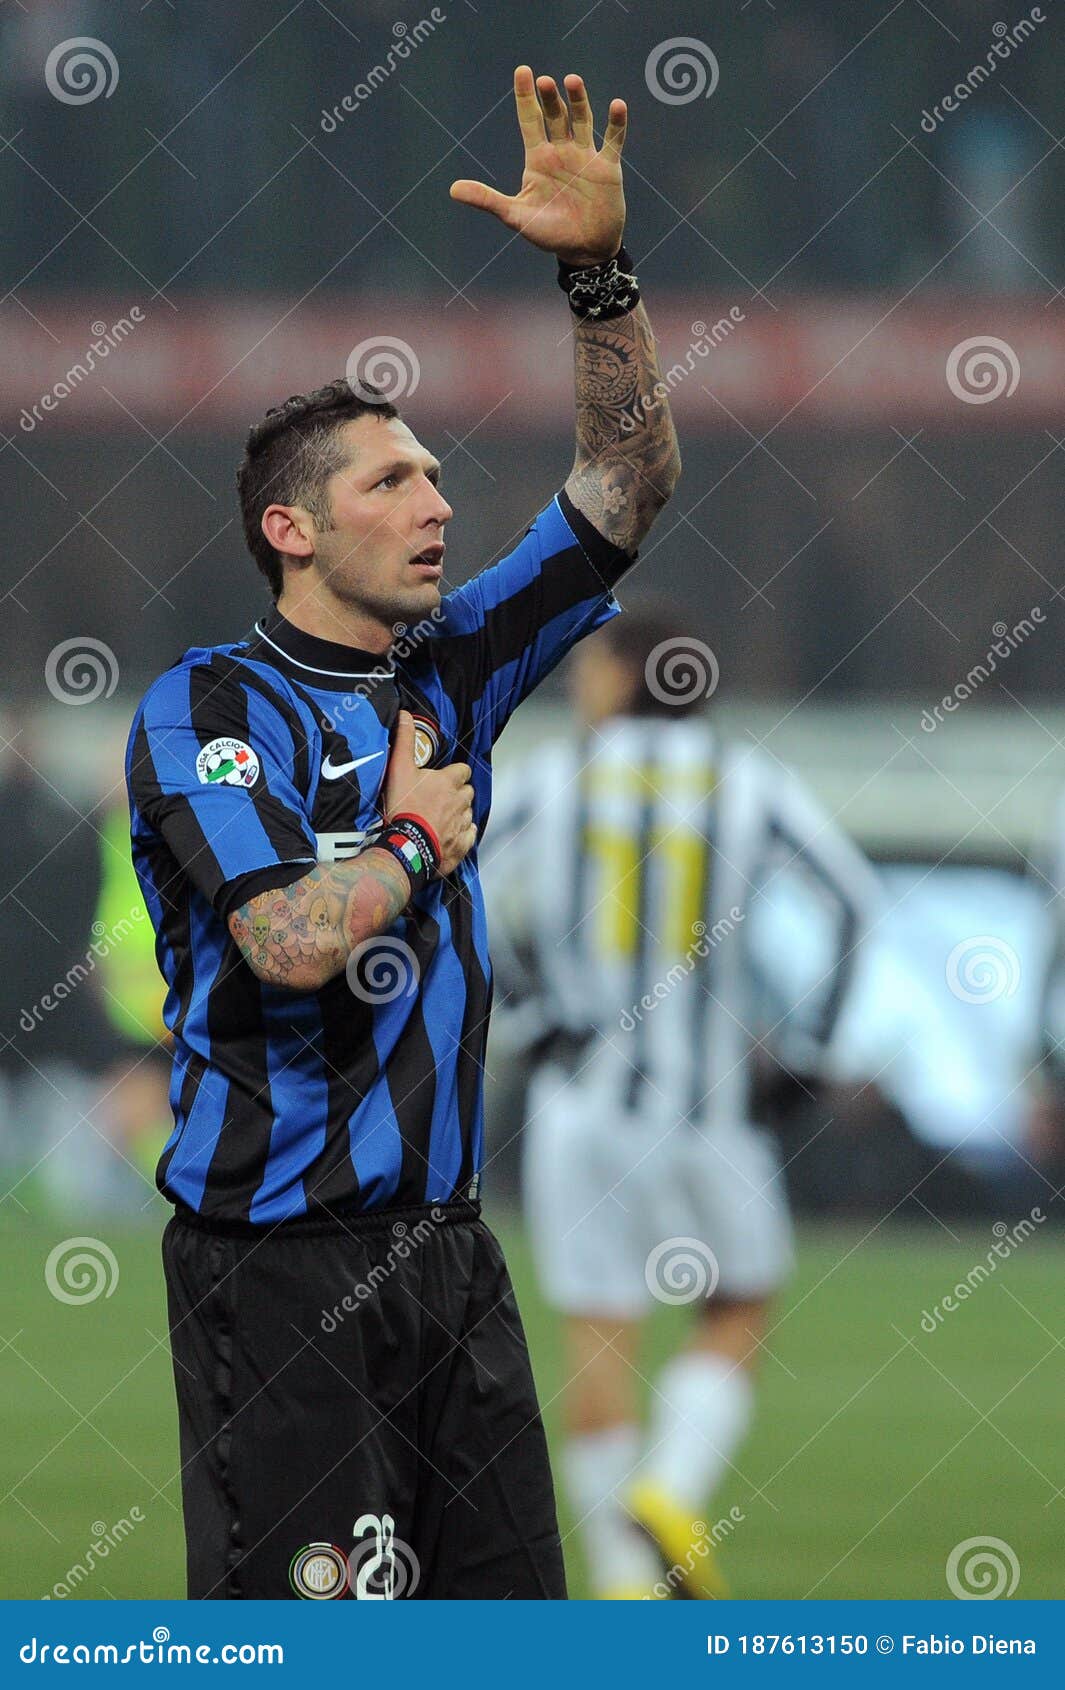 Marco Materazzi Wallpapers  Marco Materazzi Wallpapers Foot  Flickr